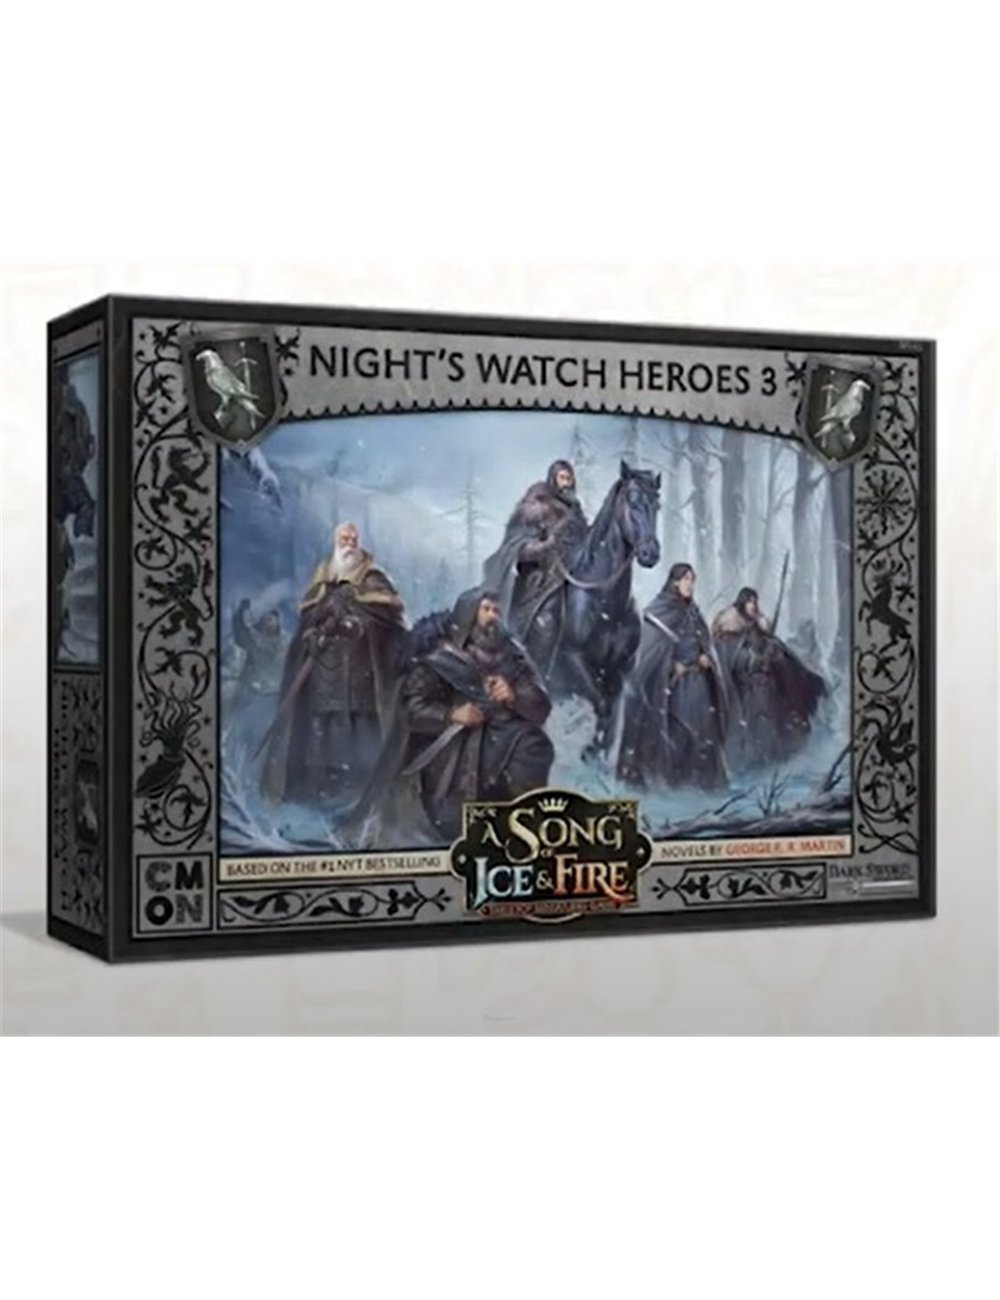 A SONG OF ICE & FIRE - Nights Watch Heroes 3 Pl